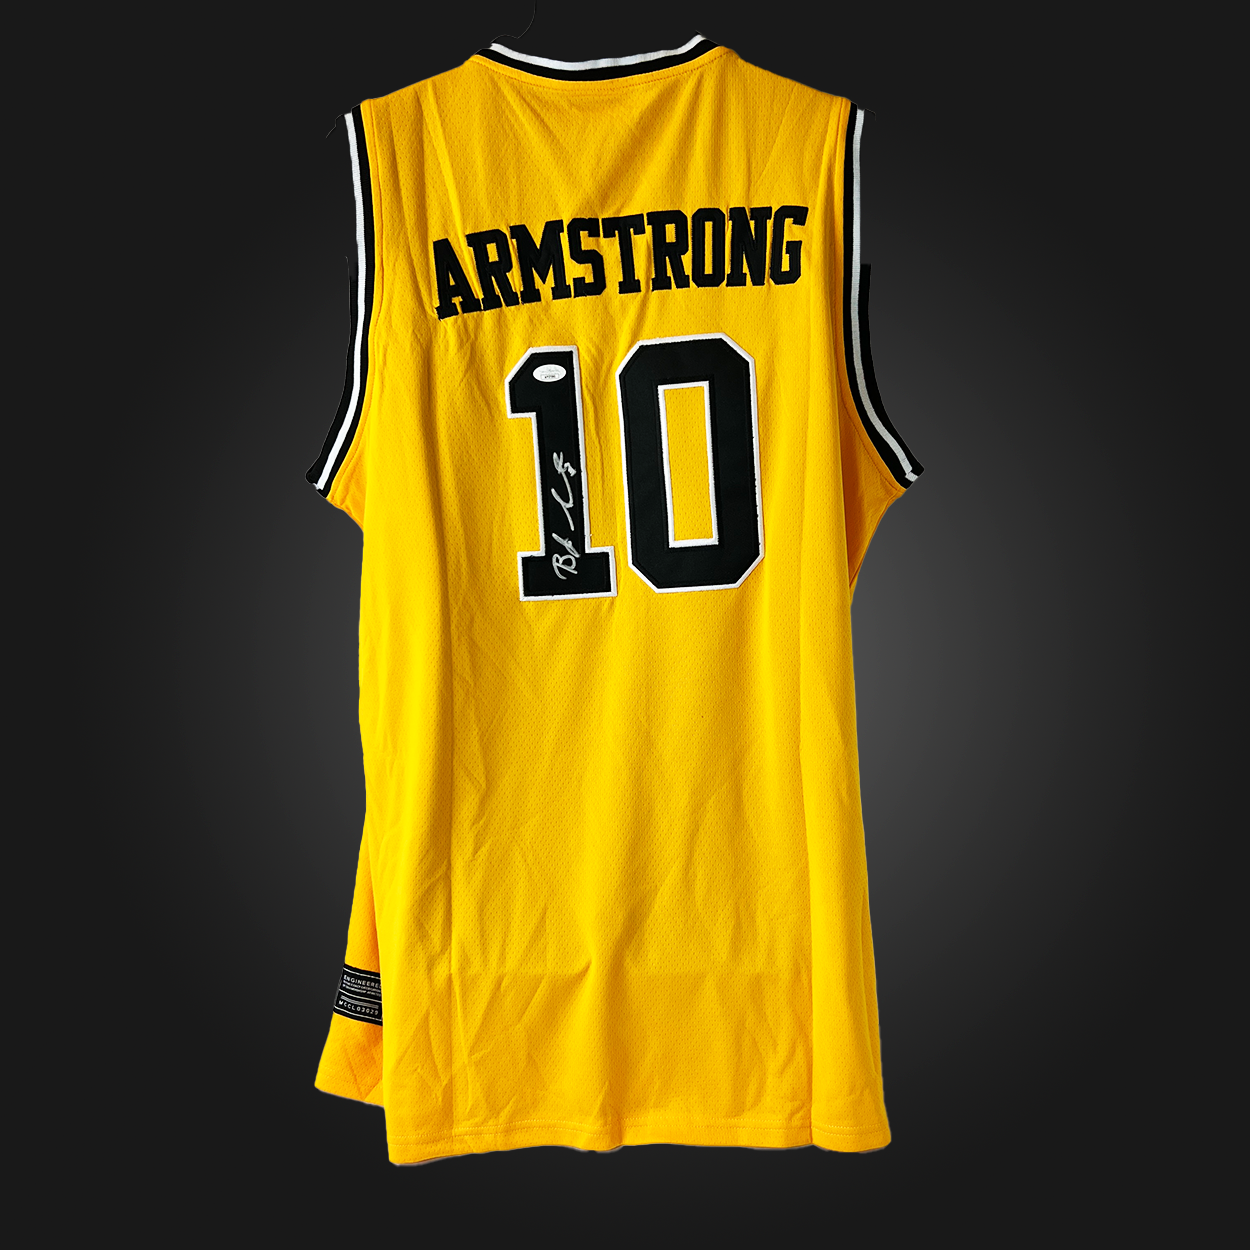 B.J. Armstrong Autographed Yellow Iowa Hawkeyes Jersey (JSA Certified Authentic)